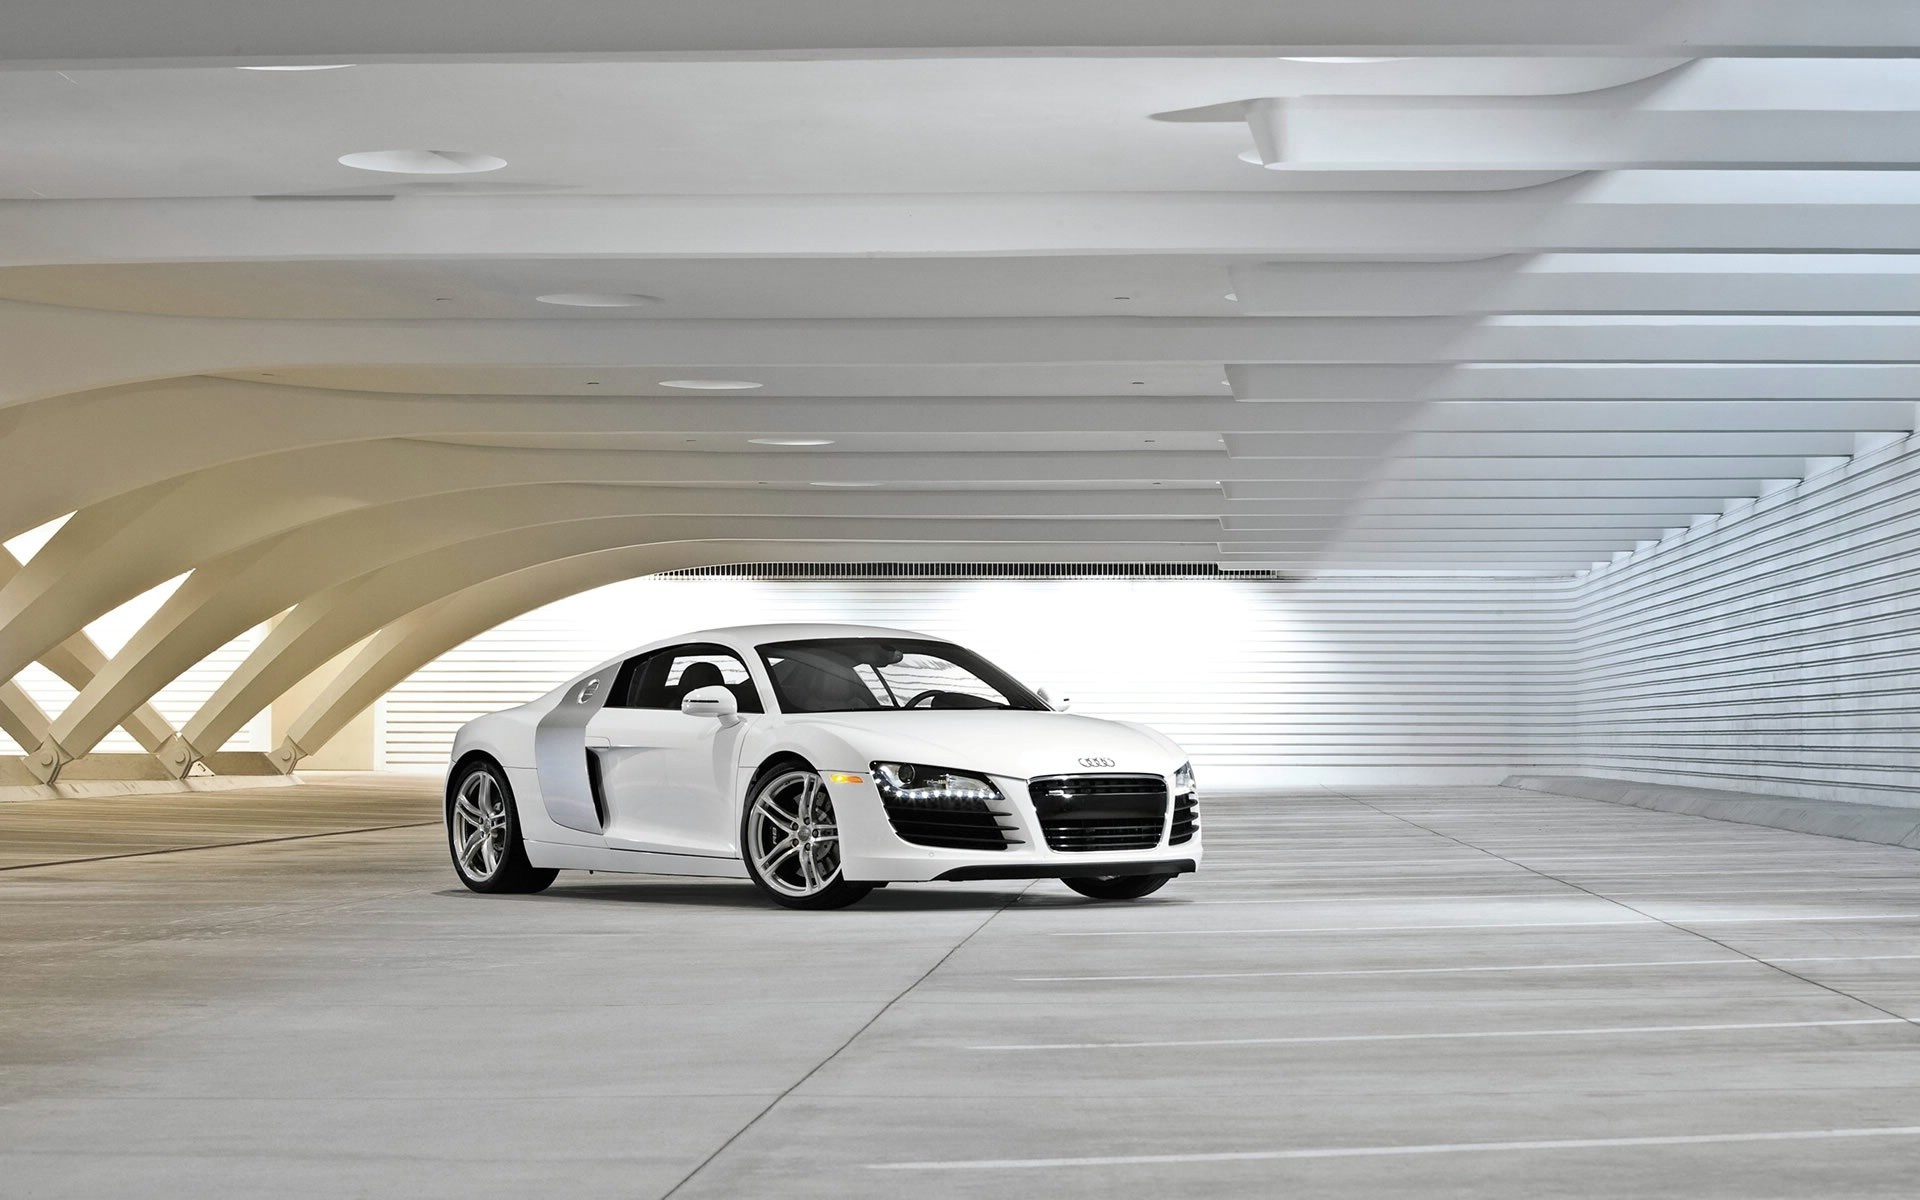 audi_r8_white_front_and_side-1920x1200[1].jpg